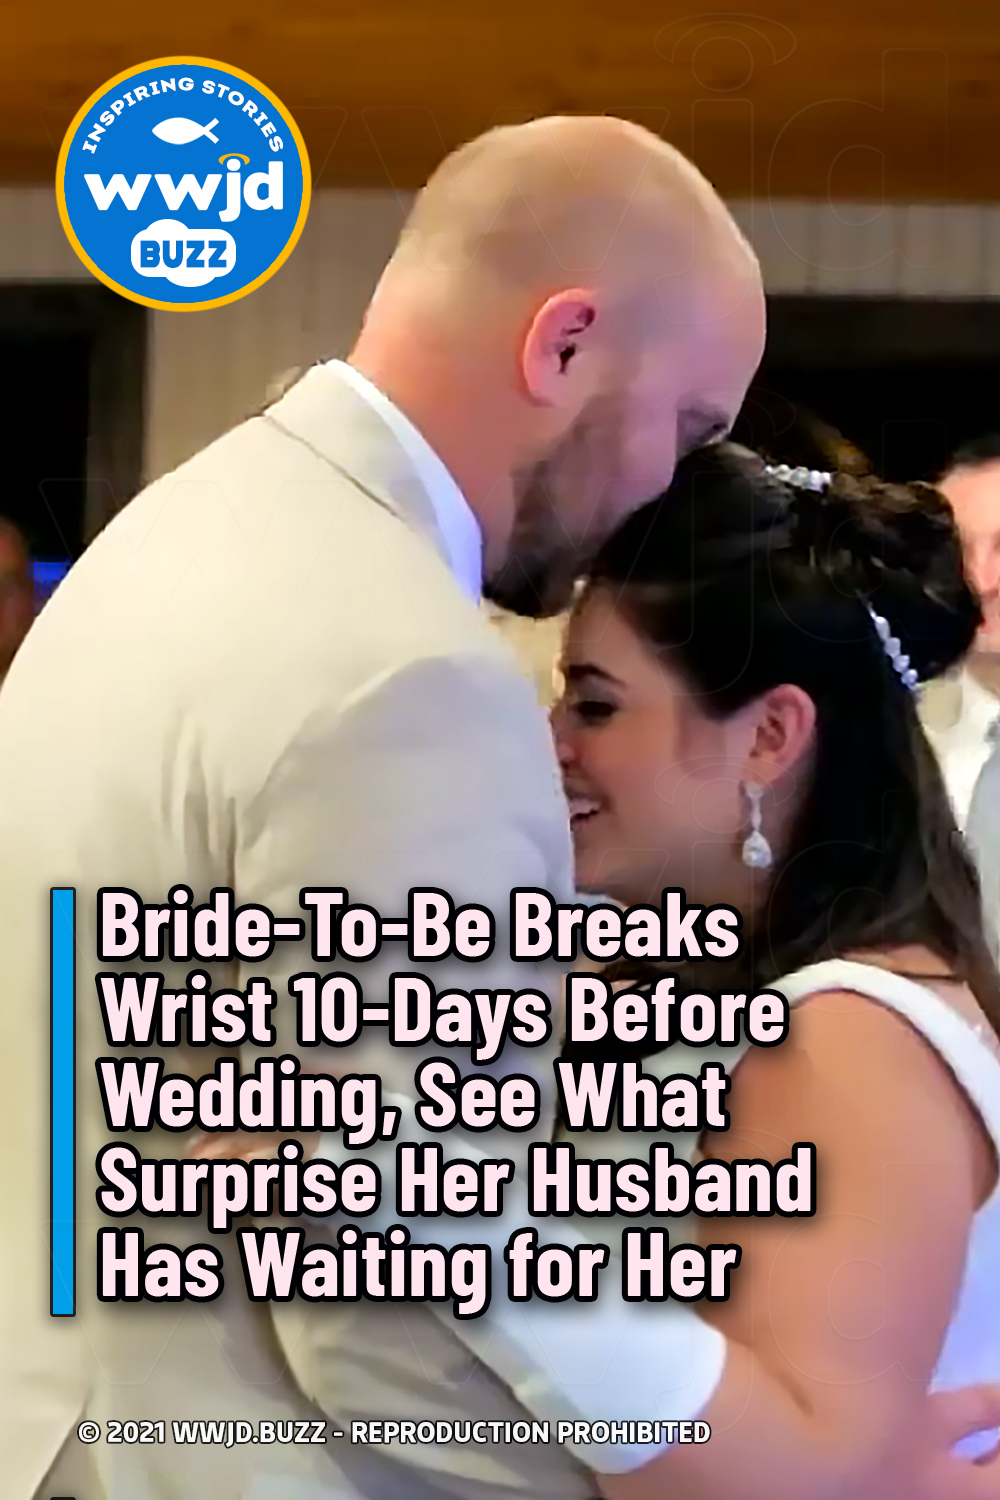 Bride-To-Be Breaks Wrist 10-Days Before Wedding, See What Surprise Her Husband Has Waiting for Her